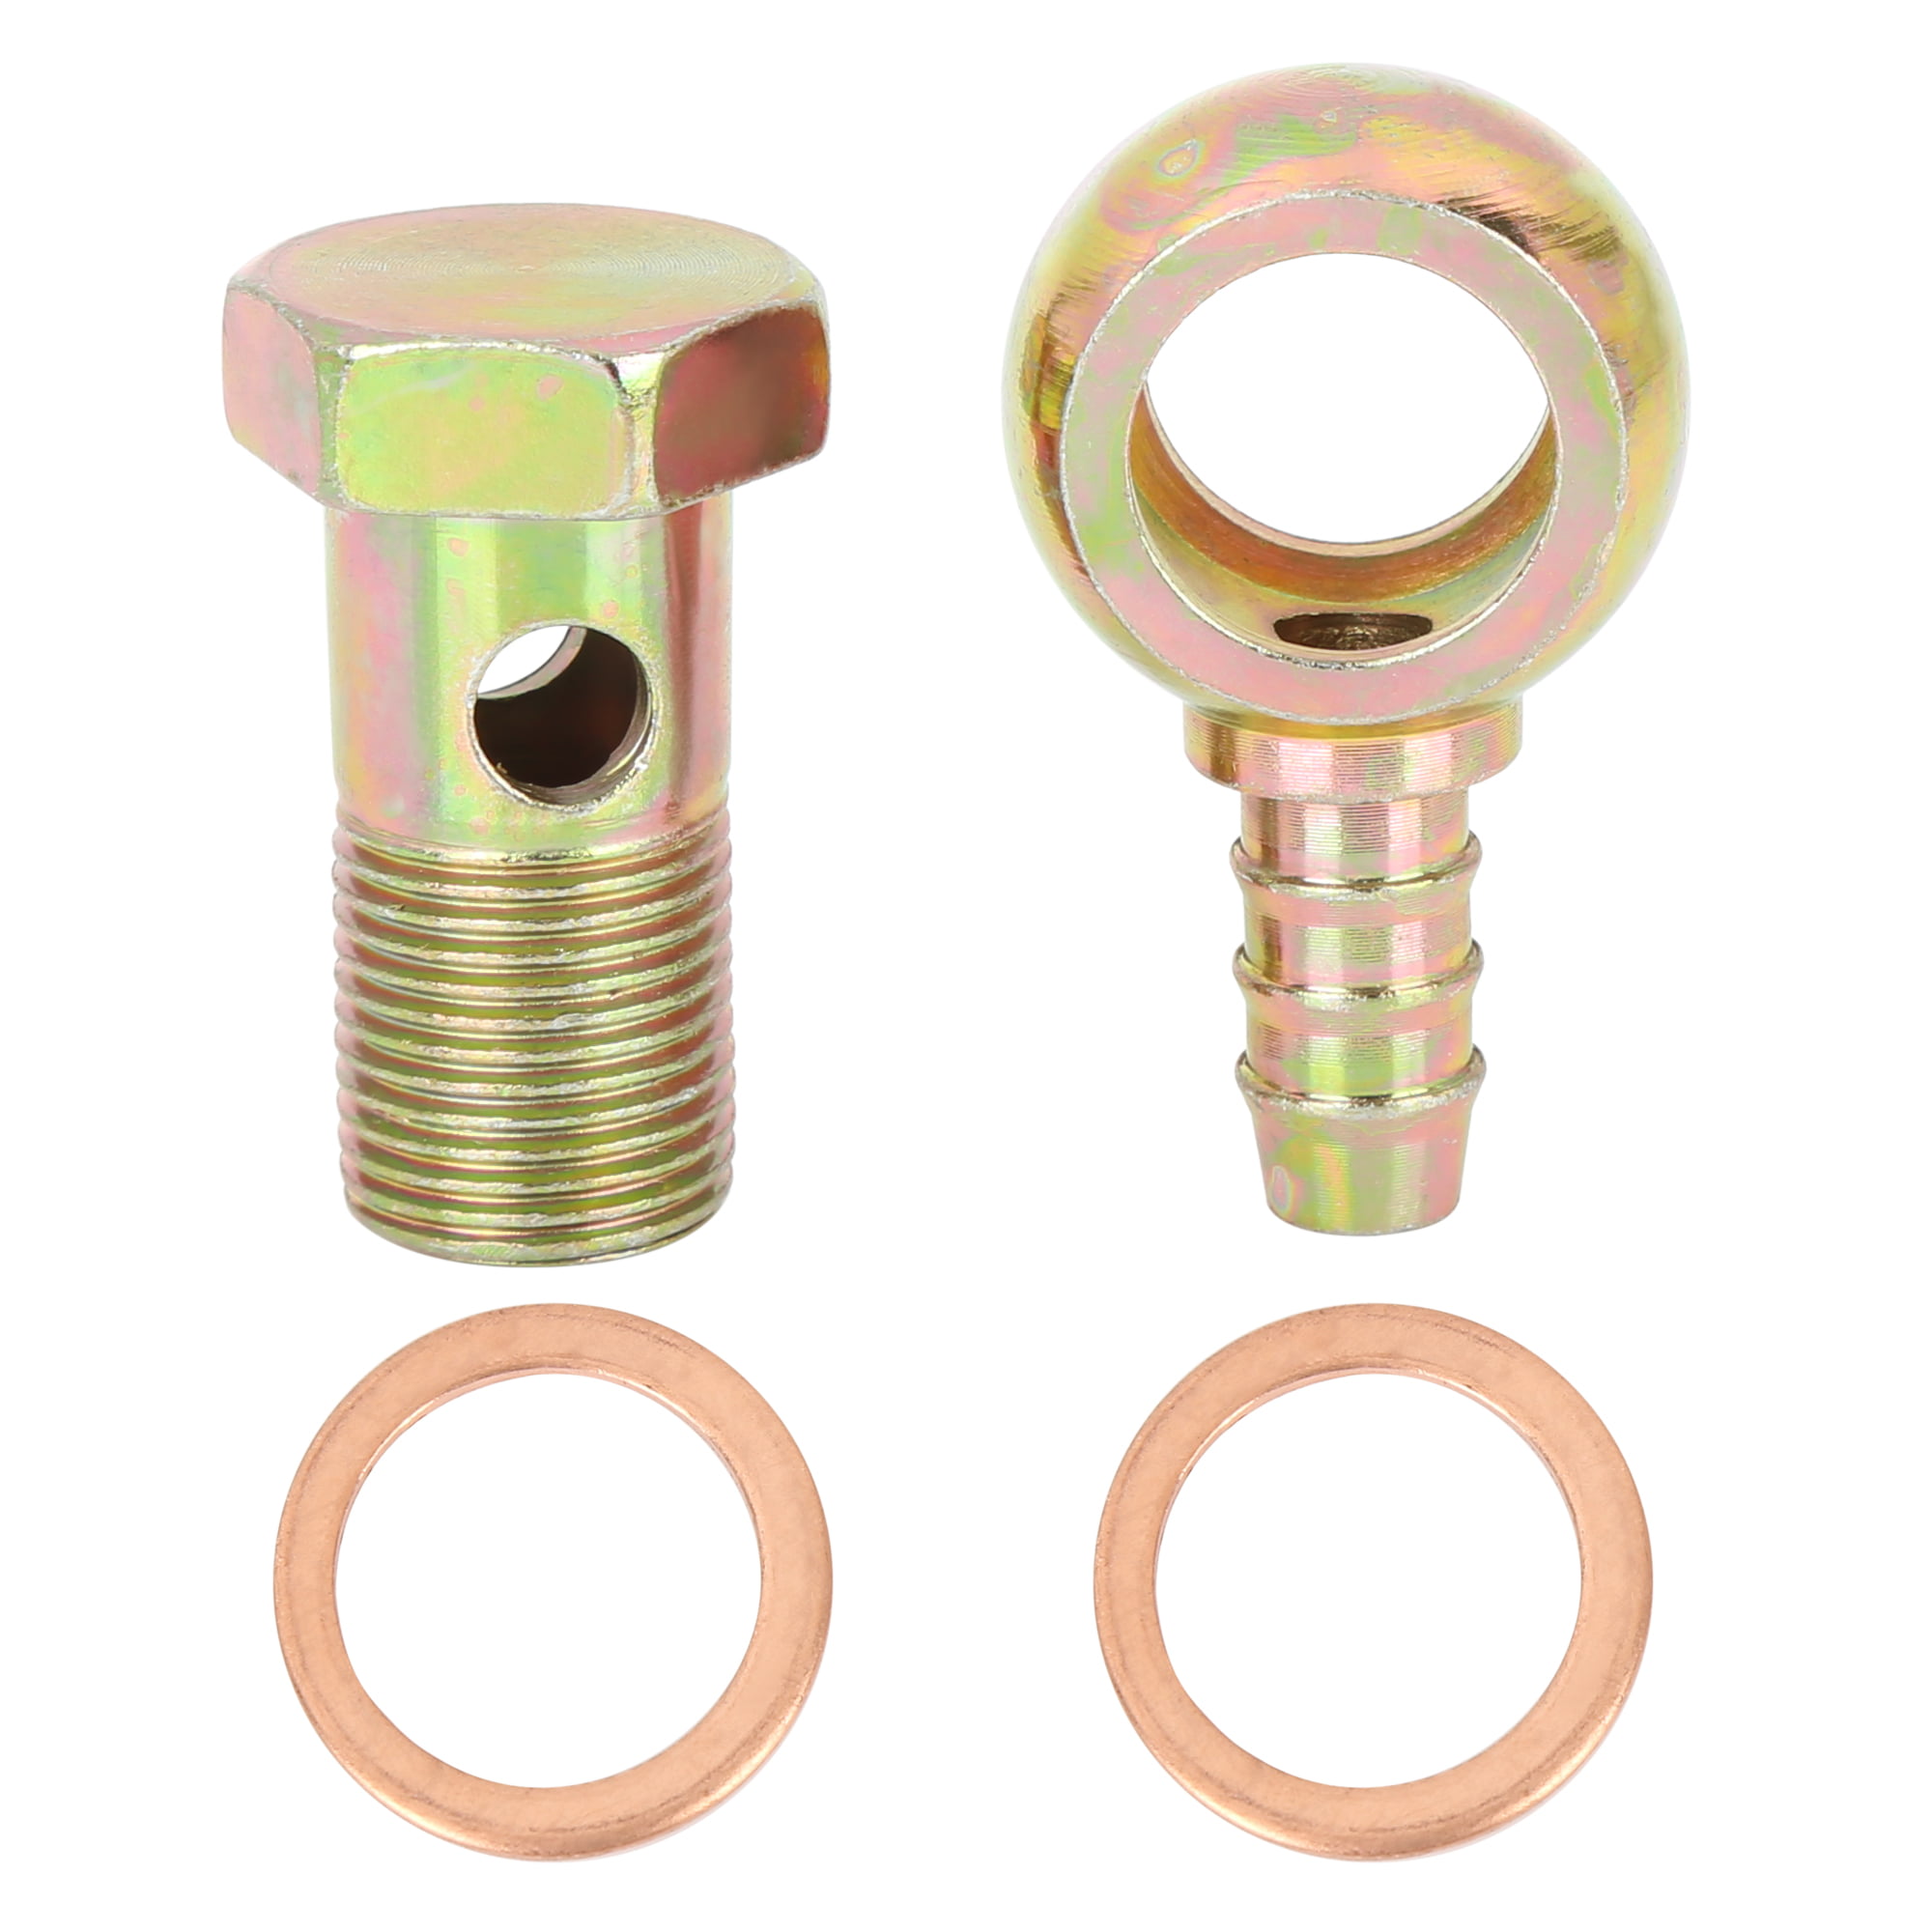 M12 X 18mm 12mm Copper washers Suitable for Brake Banjo bolts & sealing Fittings 